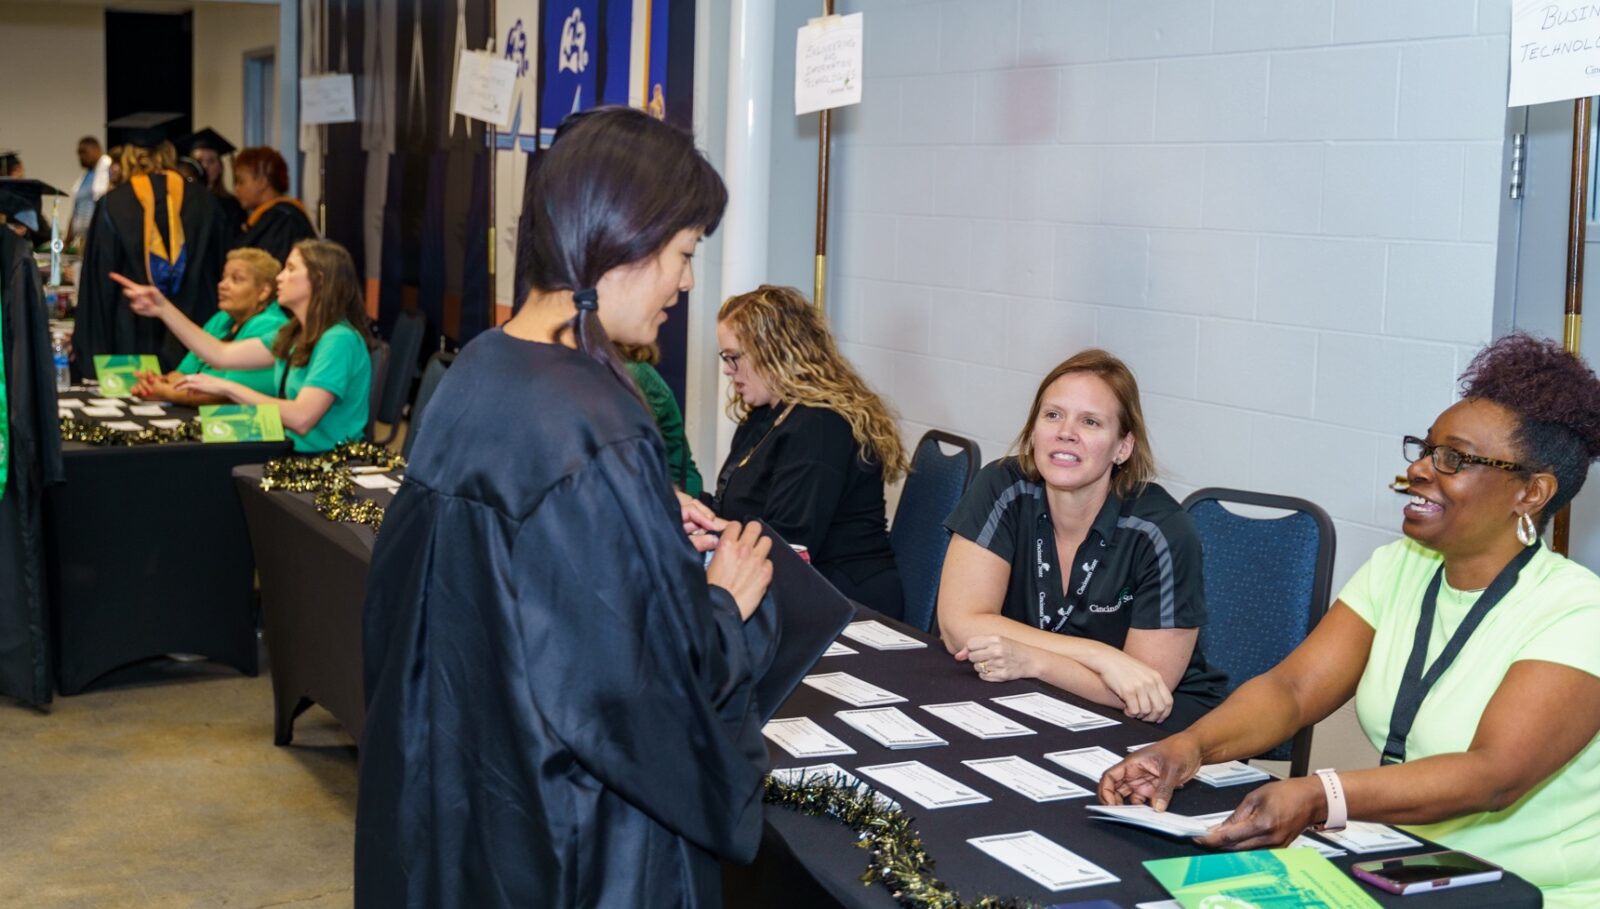 College staff members helped graduates check-in and prepare for the Commencement ceremony